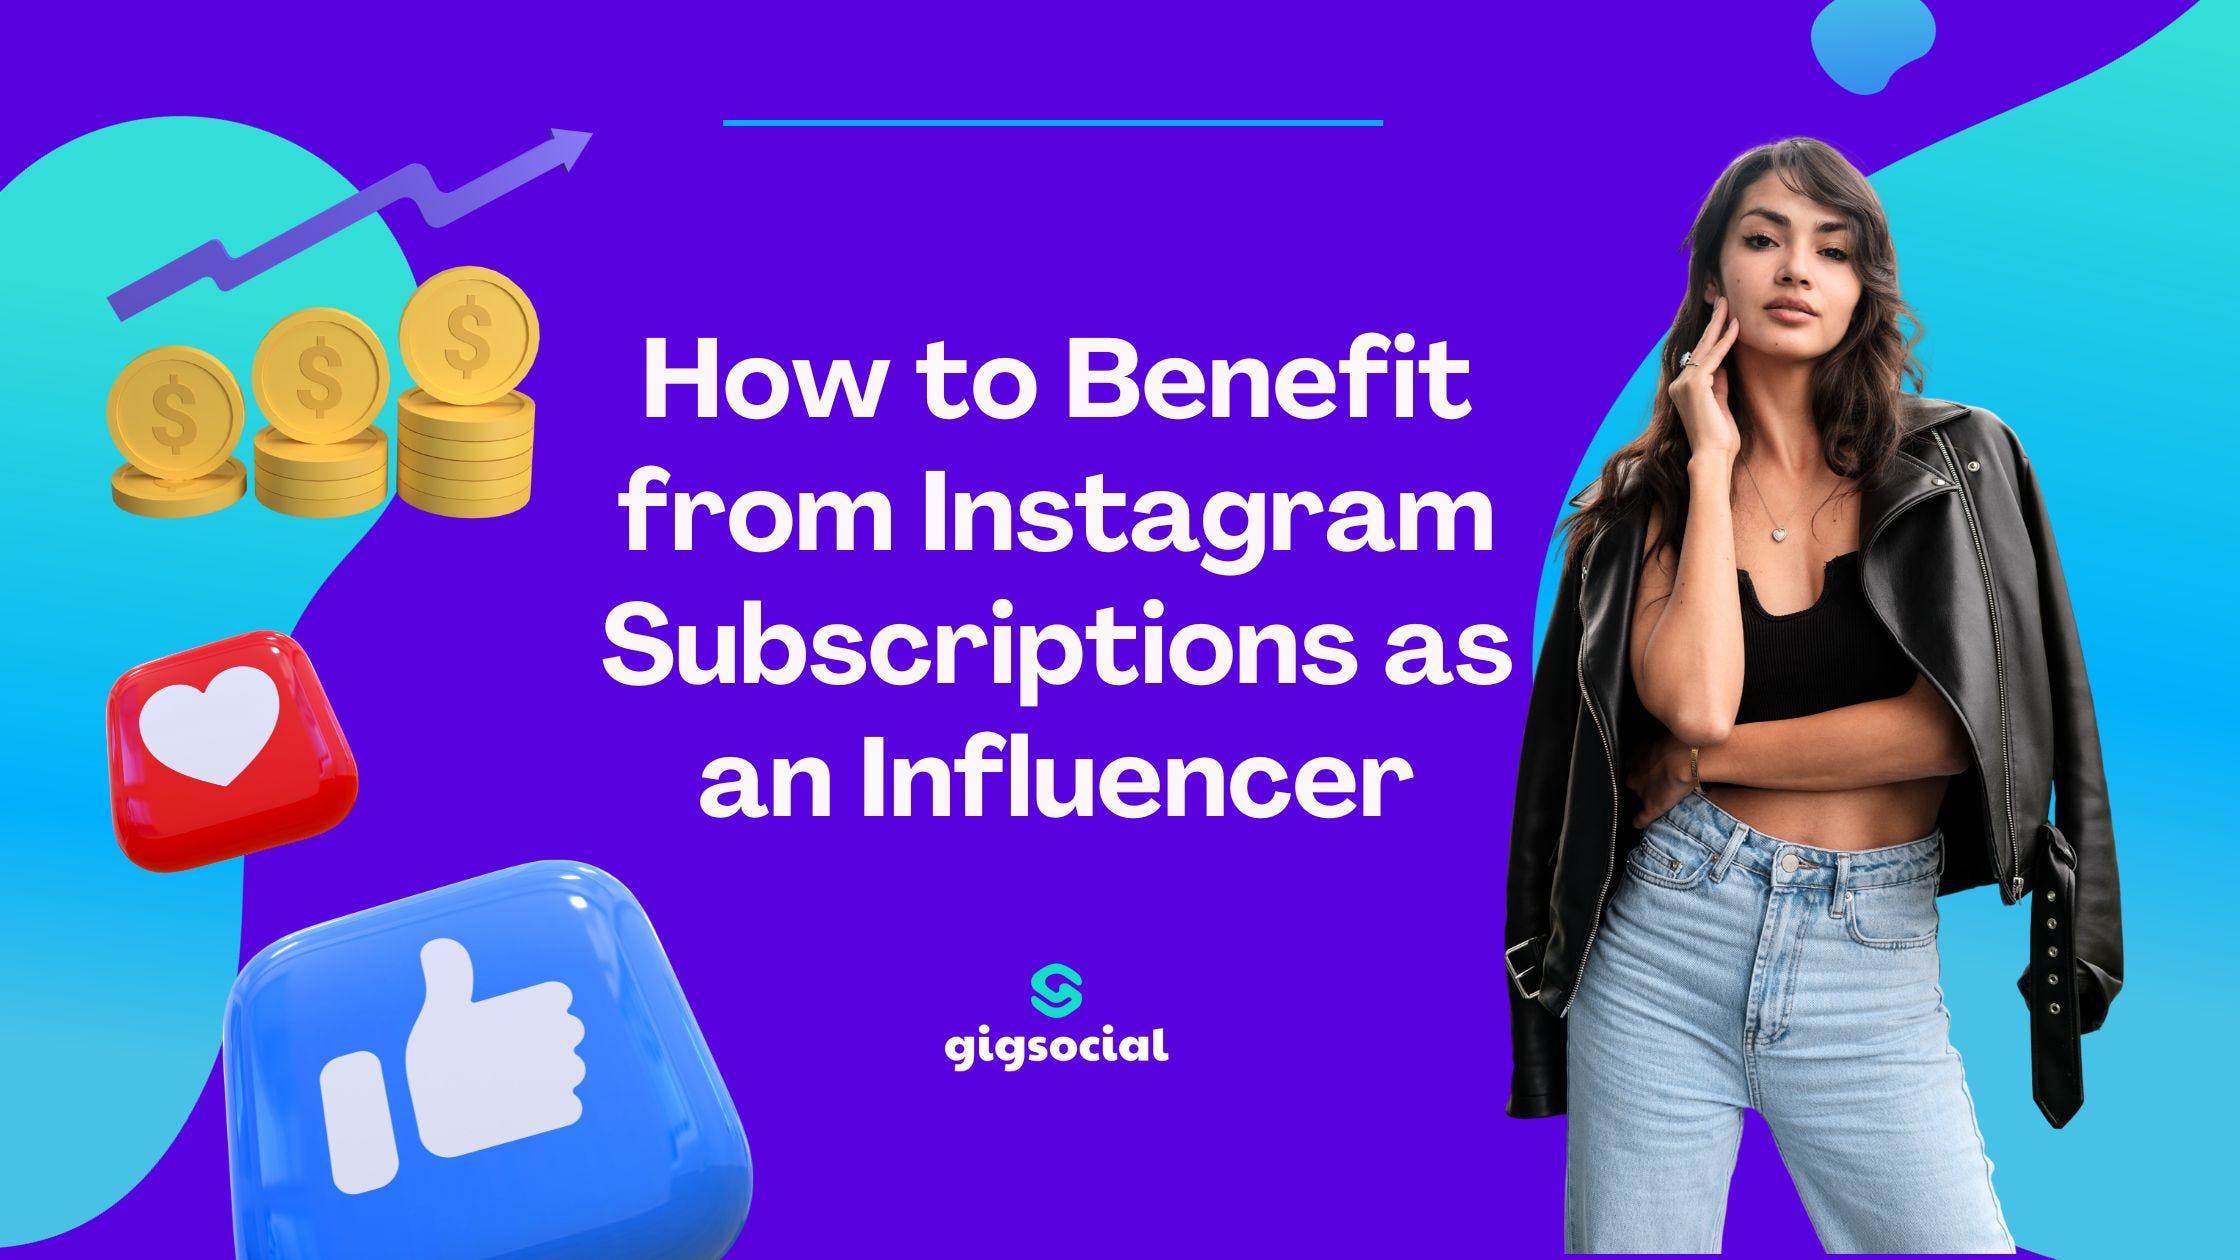 How to Benefit from Instagram Subscriptions as an Influencer